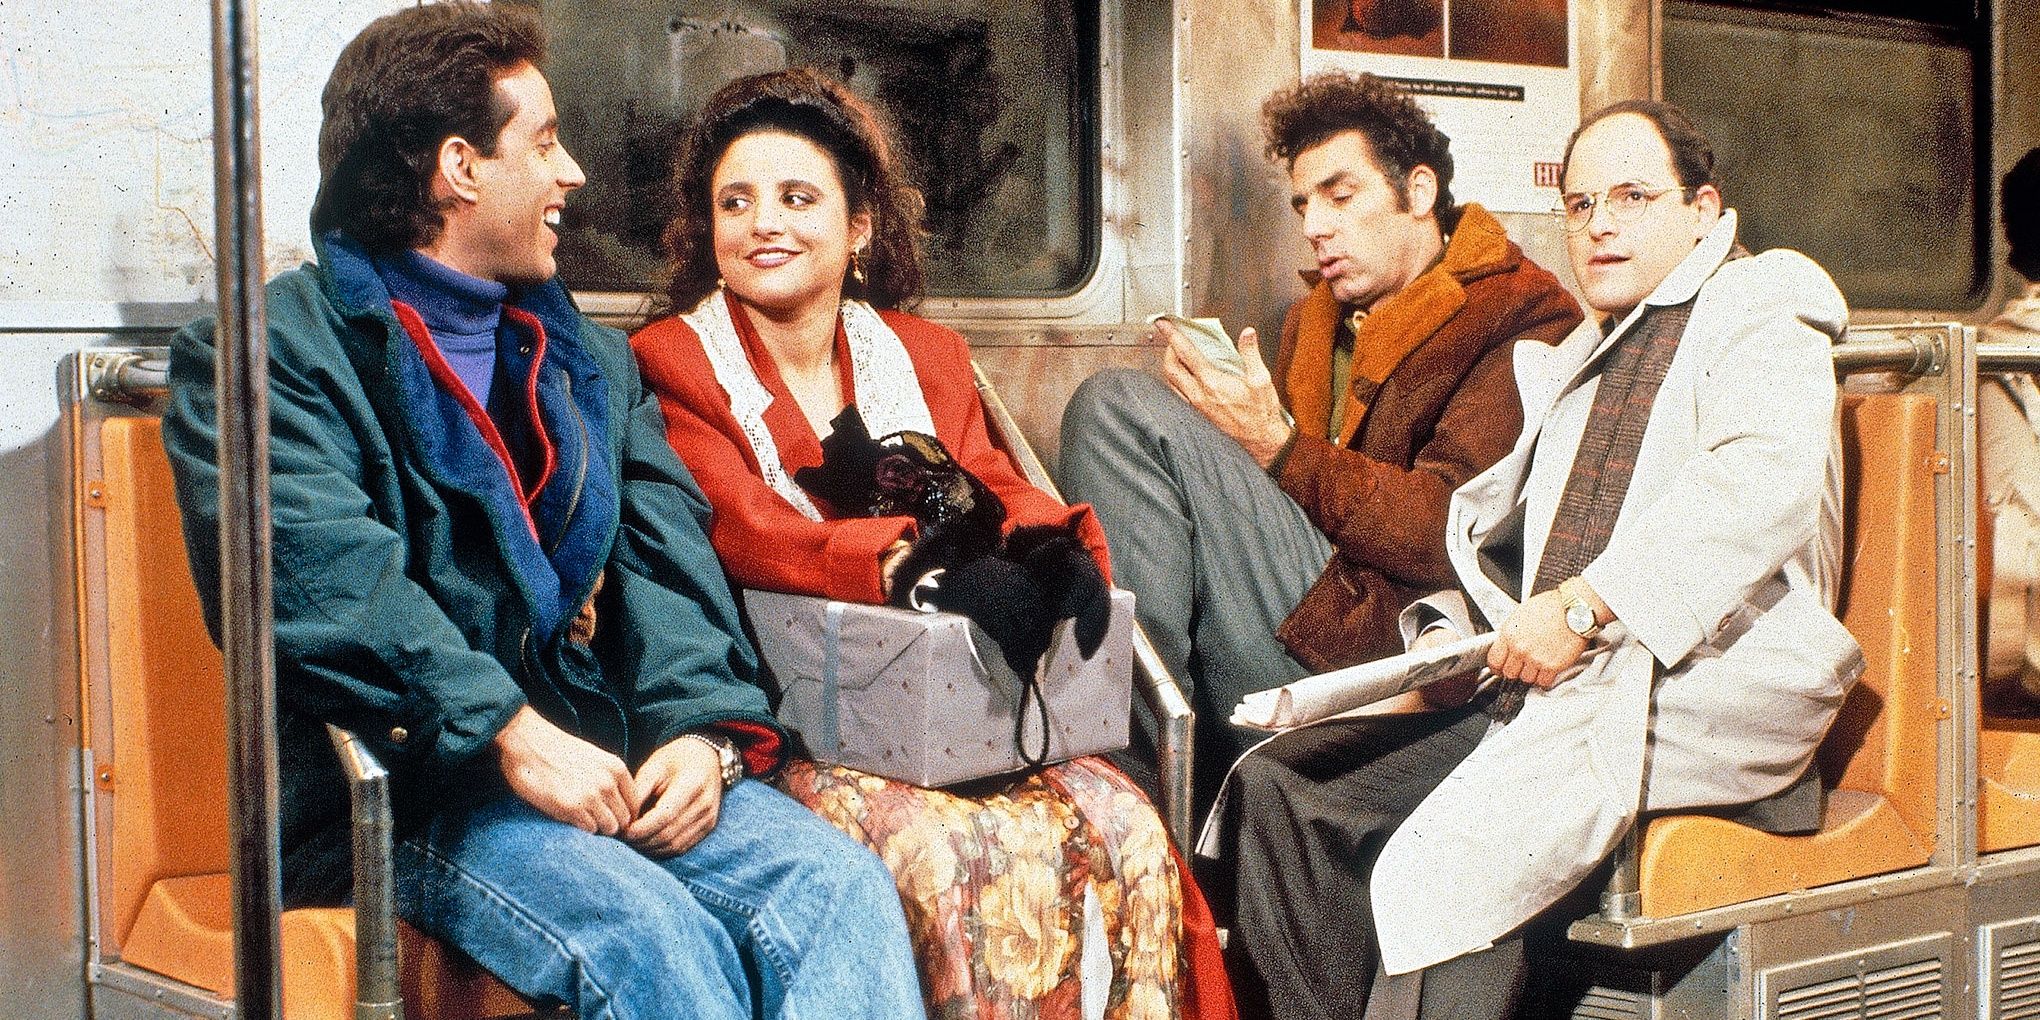 Jerry, George, Elaine, and Kramer ride the subway in Seinfeld